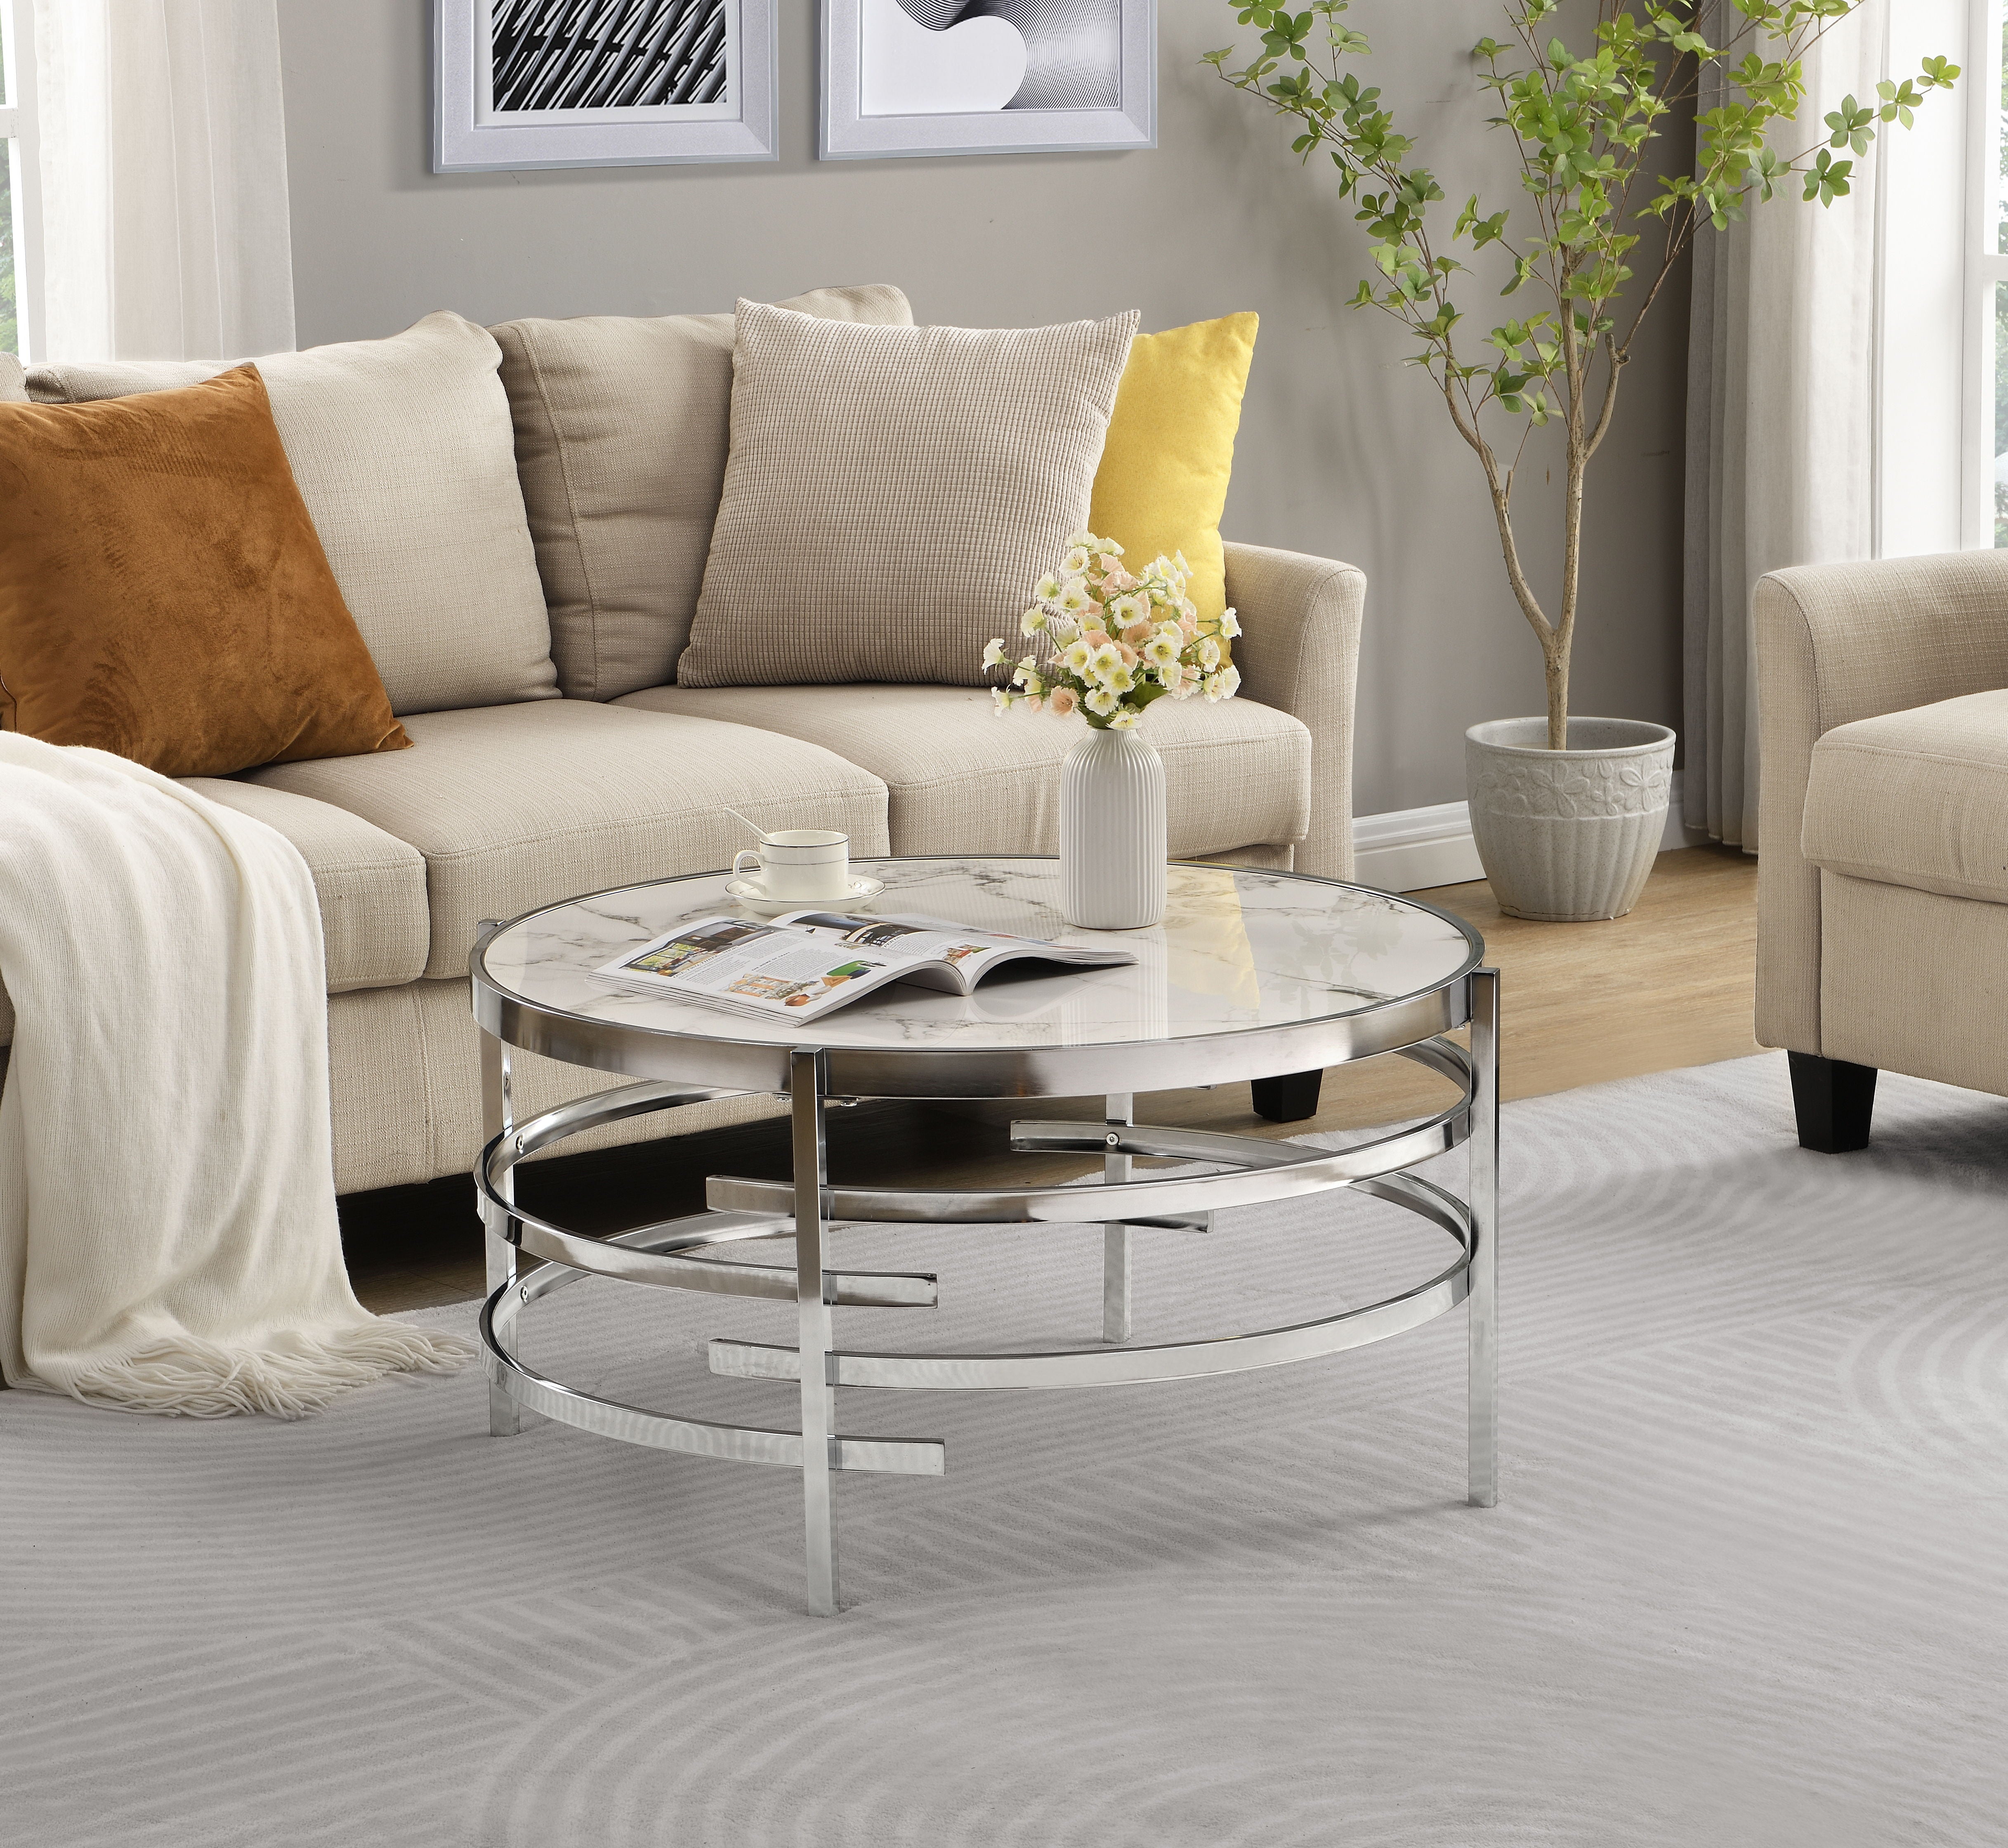 Chrome Round Coffee Table With Sintered Stone Top&Sturdy Metal Frame, Modern Coffee Table For Living Room, Silver